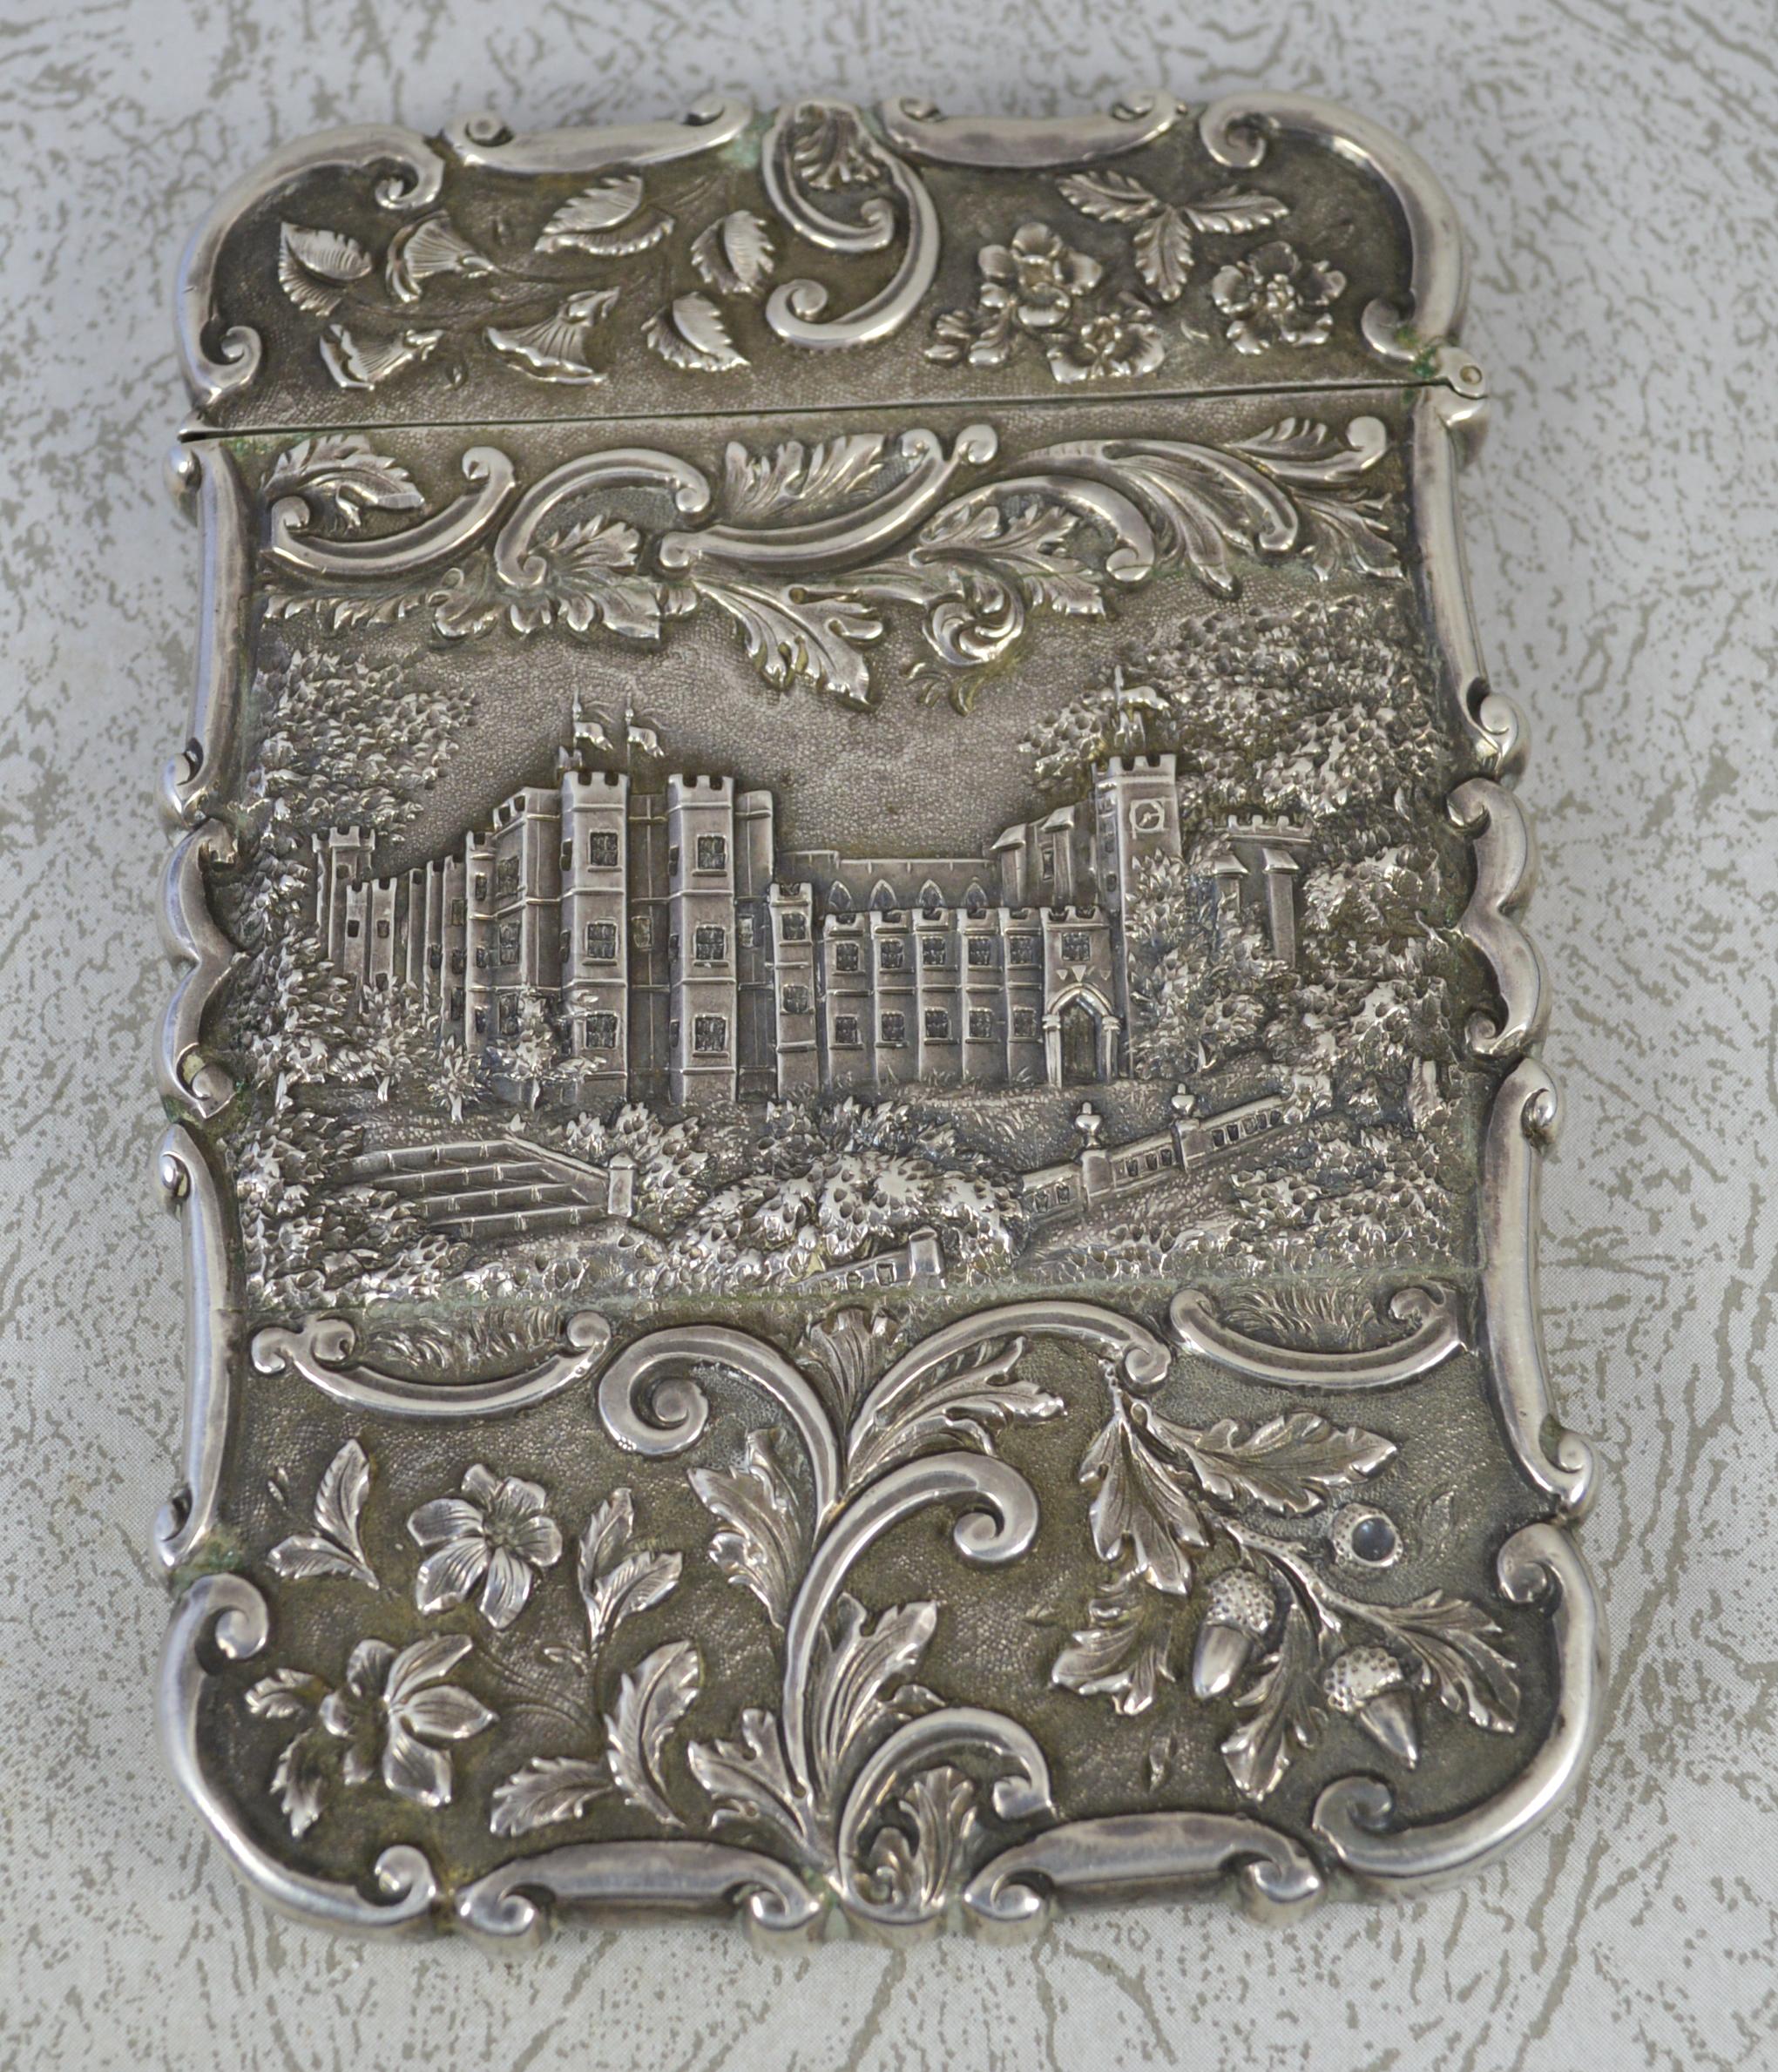 A stunning quality sterling silver card case.
Early Victorian period example by Nathaniel Mills.
The castle top design is of Warwick castle to one side and Windsor the other.
Hallmarks ; lion, Birmingham anchor, Queen Victoria's head and makers